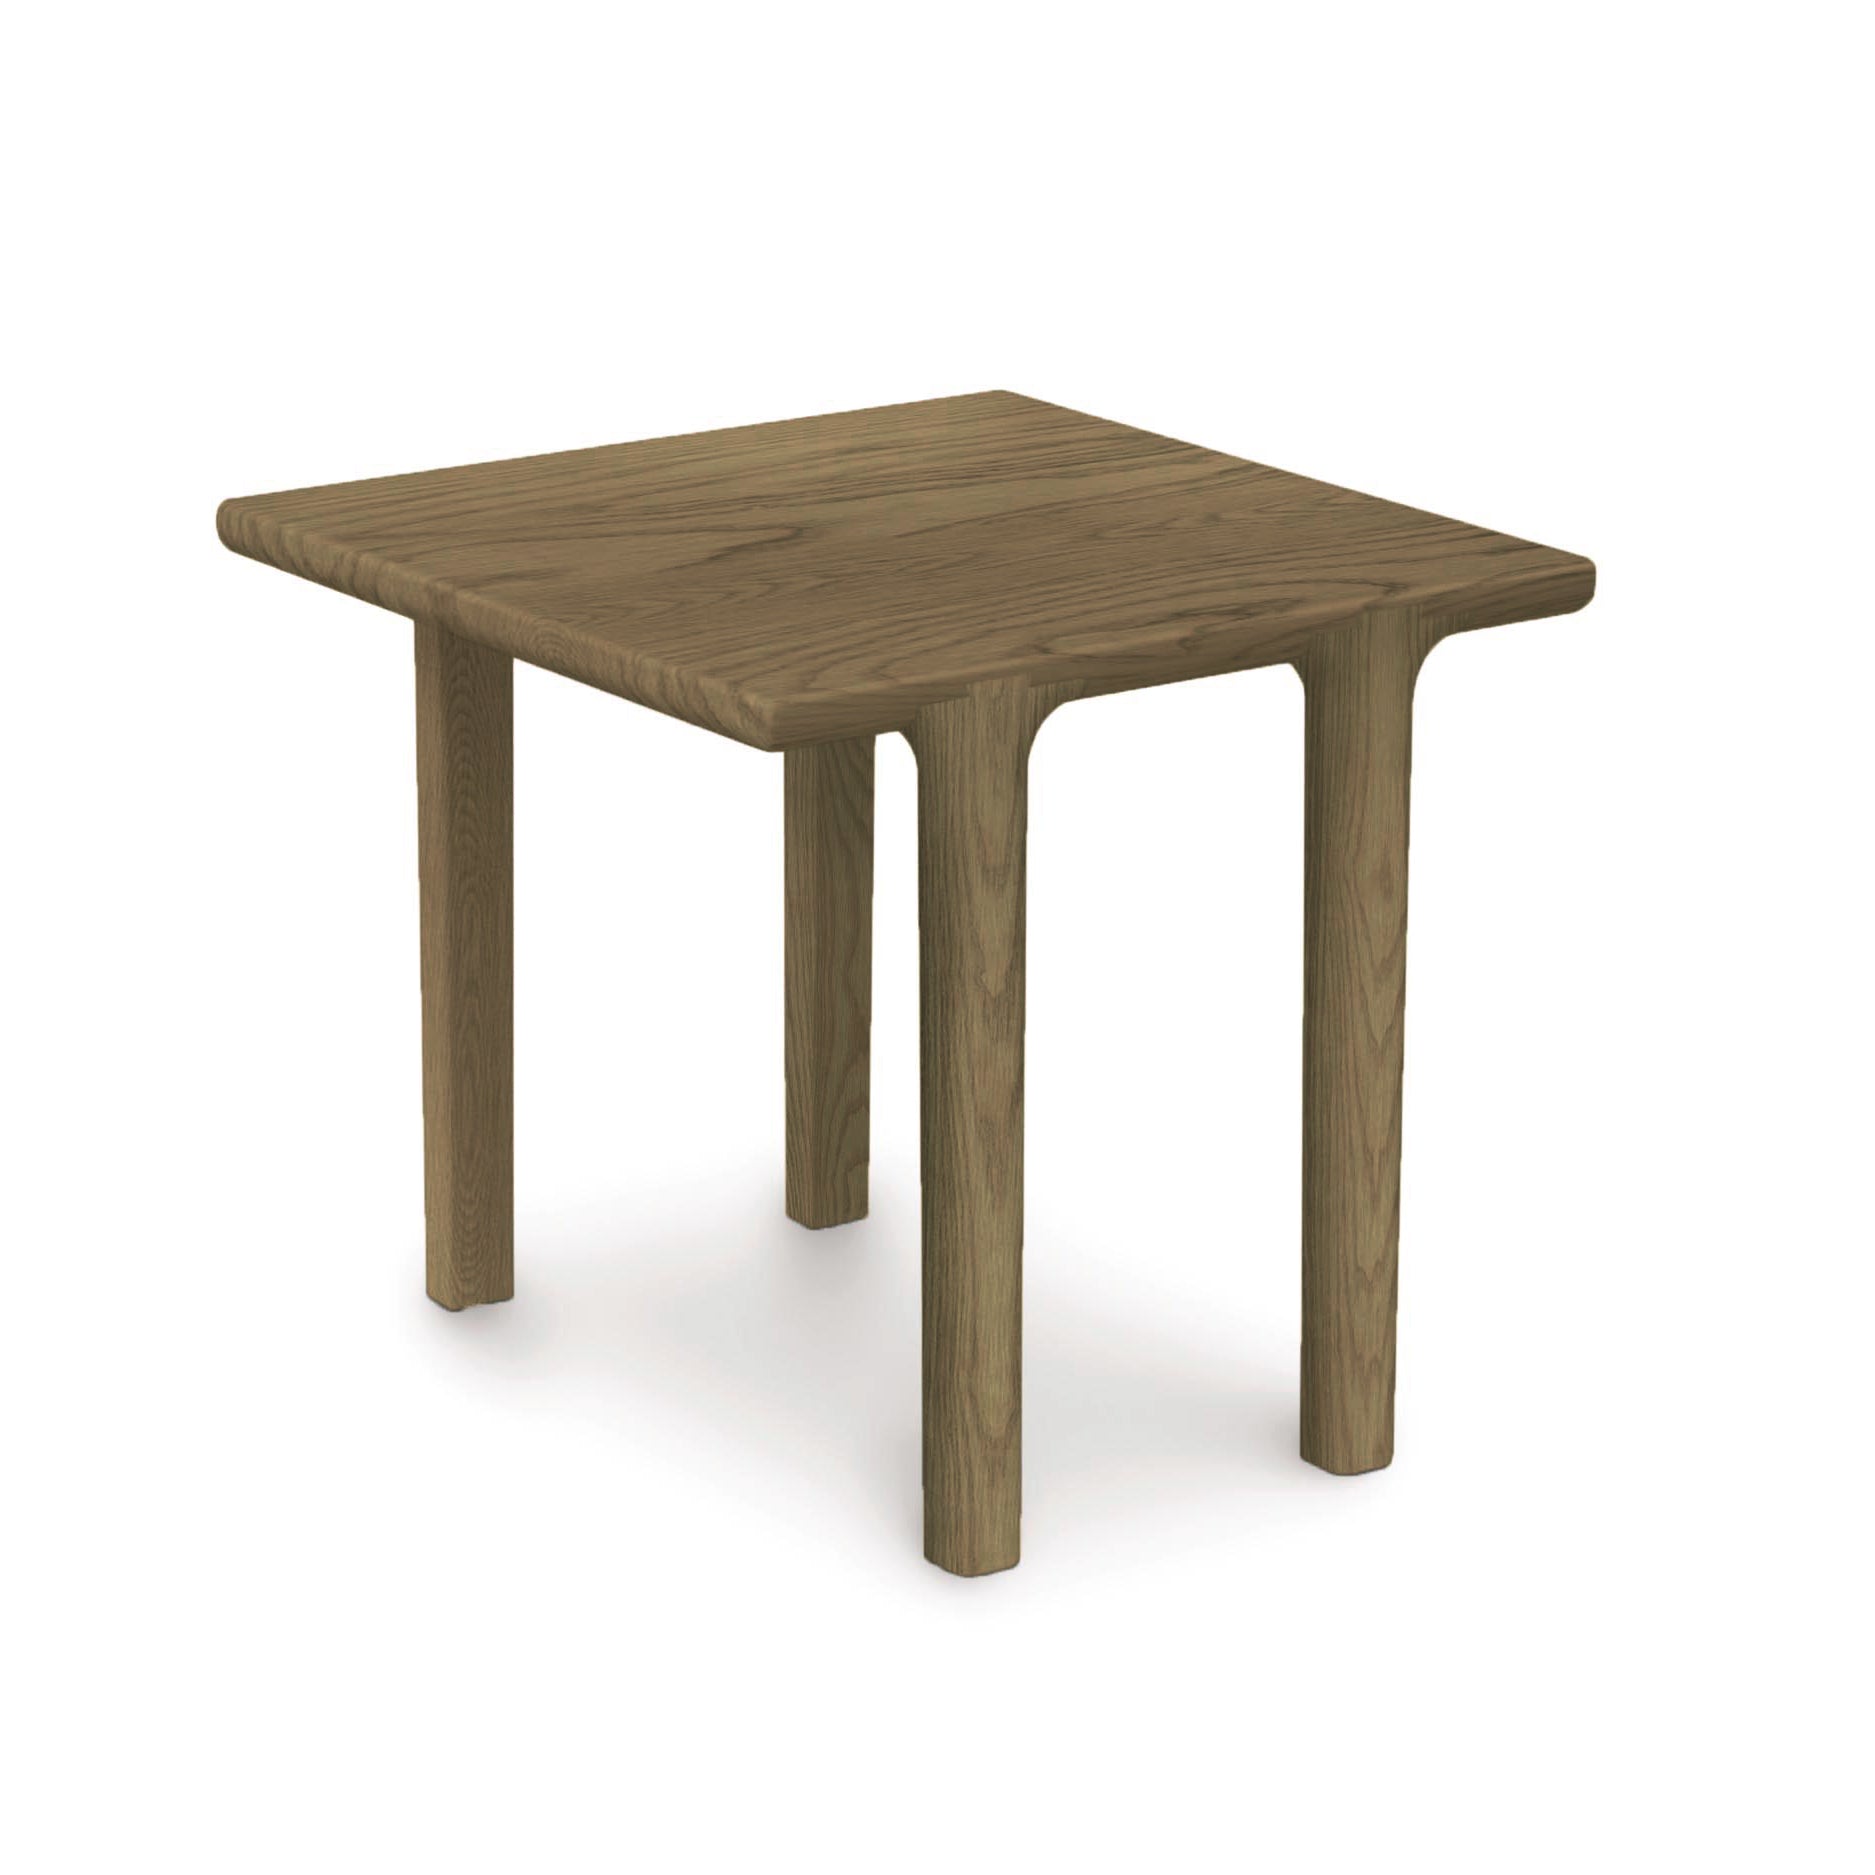 A simple wooden table, known as the Copeland Furniture Sierra Square End Table, with four legs on a white background, made of solid North American hardwood.